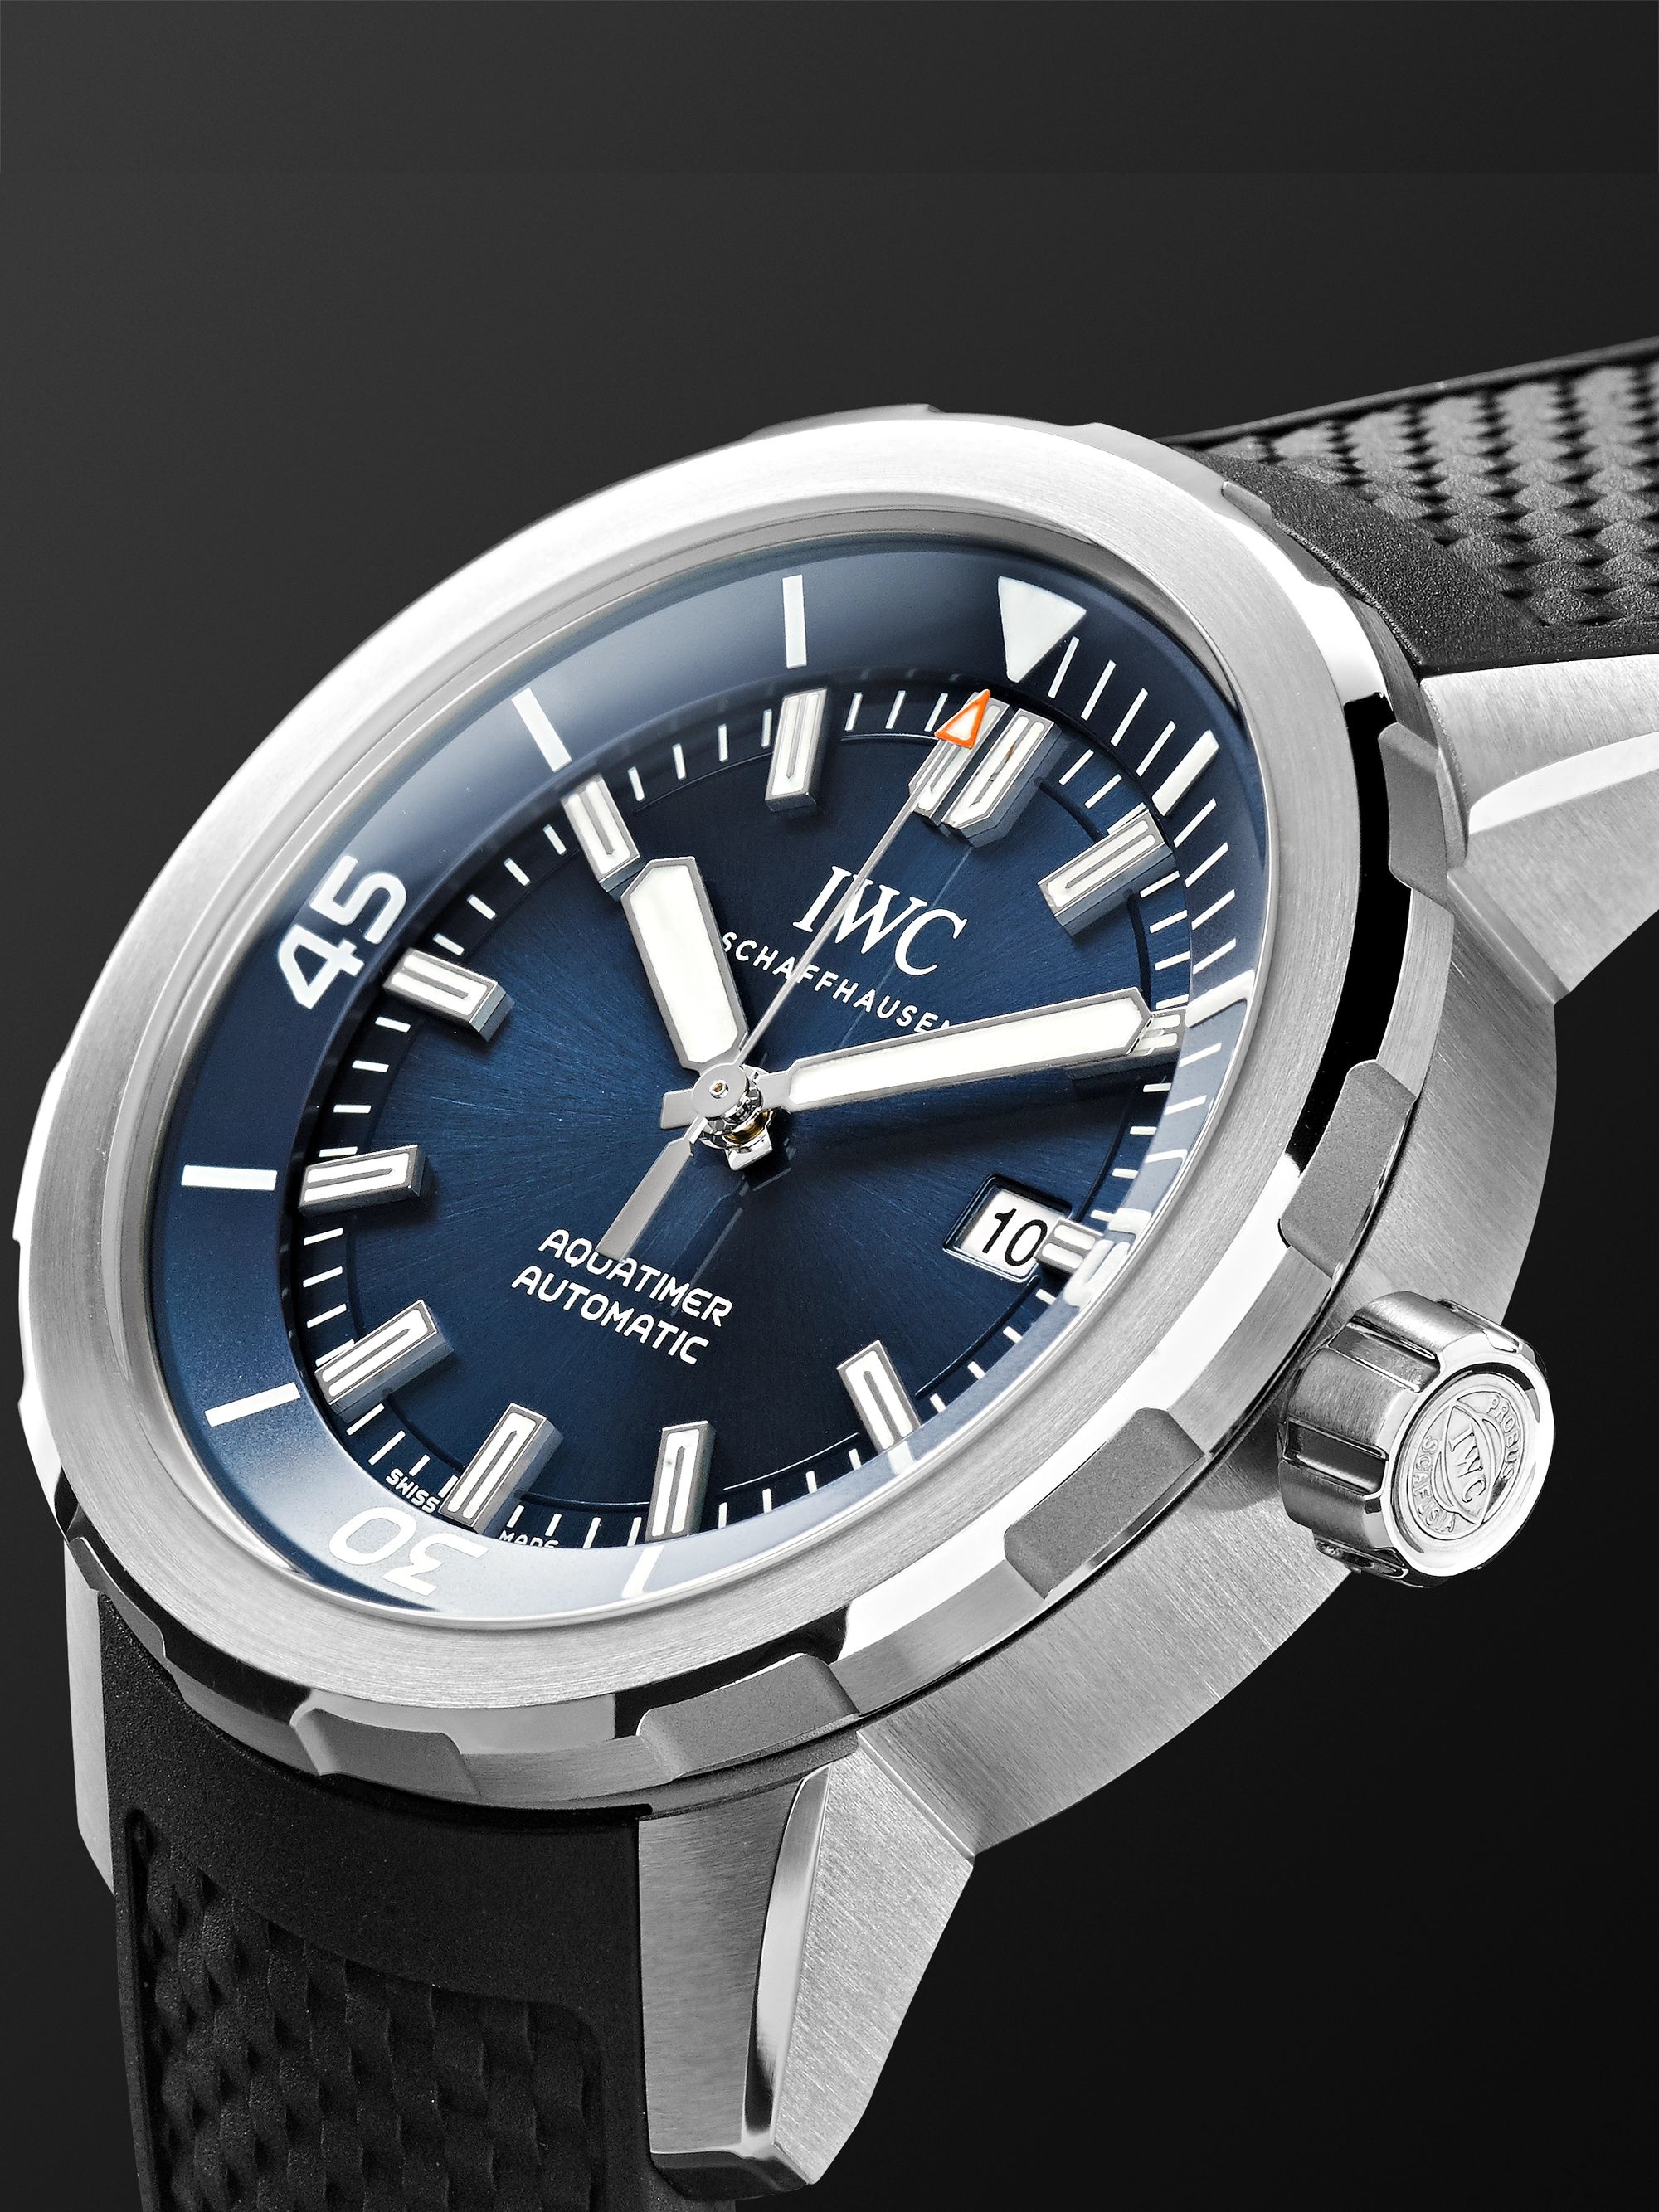 IWC SCHAFFHAUSEN Aquatimer Expedition Jacques-Yves Cousteau Automatic 42mm Stainless Steel and Rubber Watch, Ref. No. IW329005